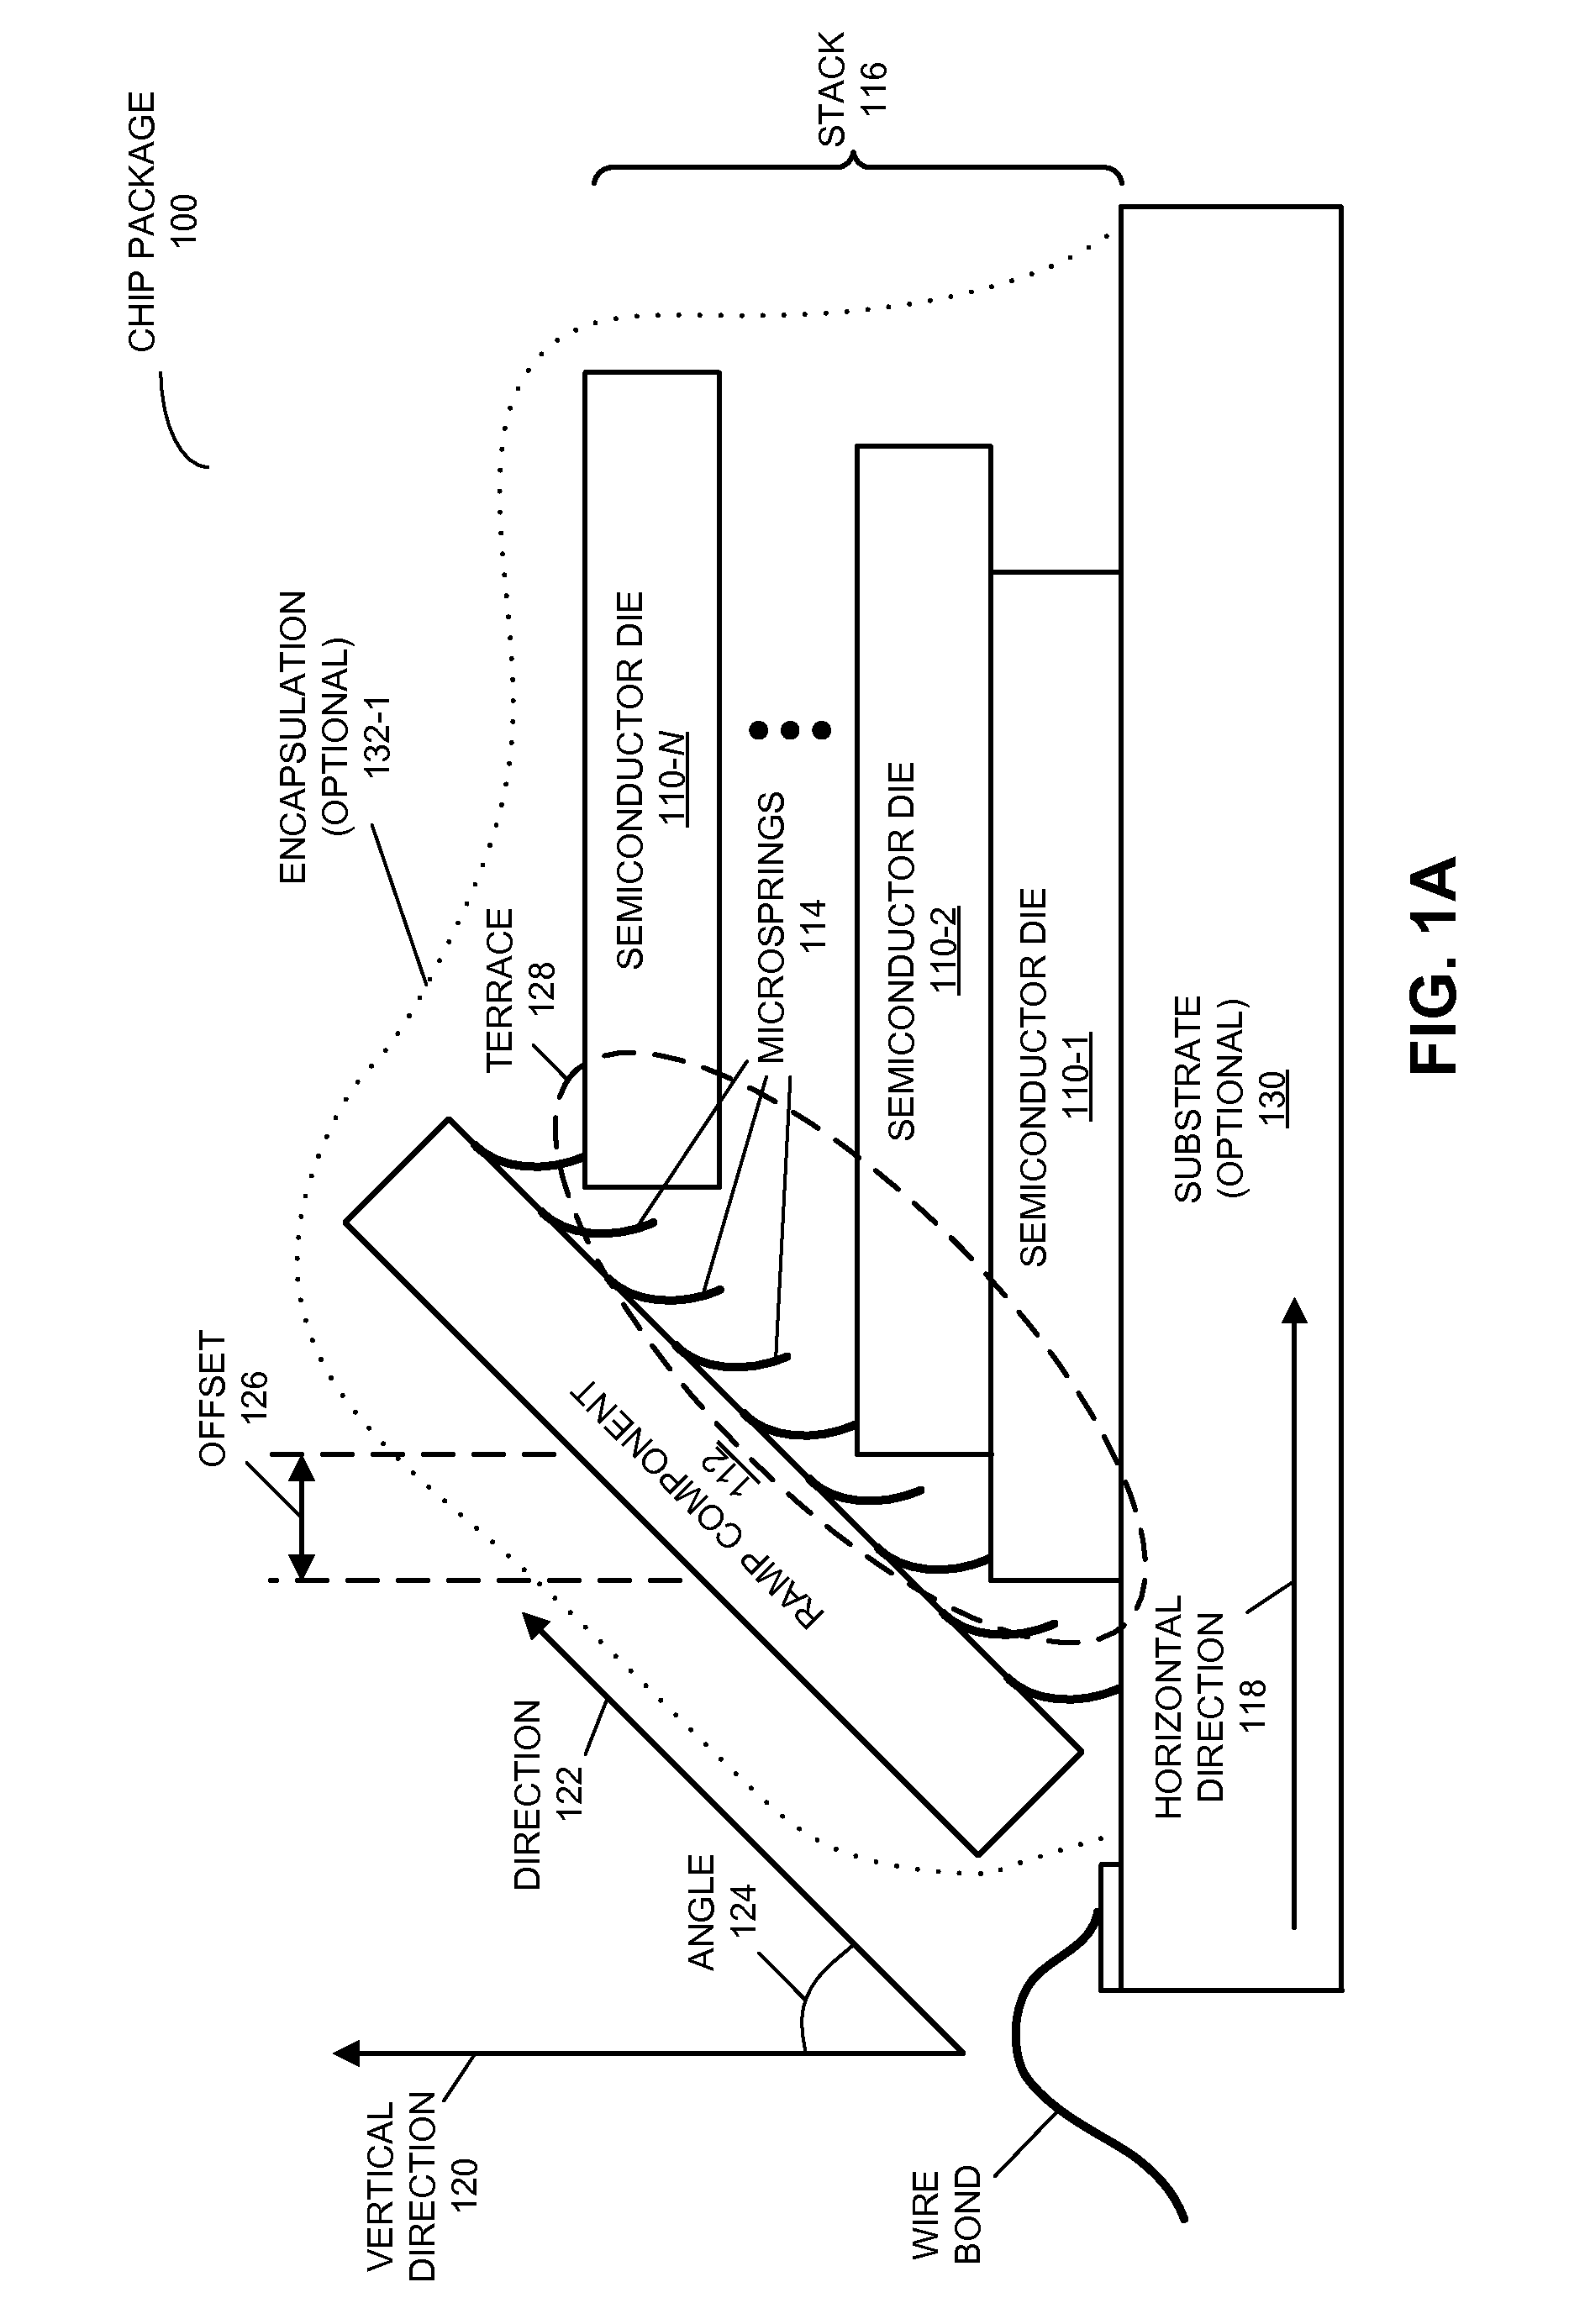 High-bandwidth ramp-stack chip package